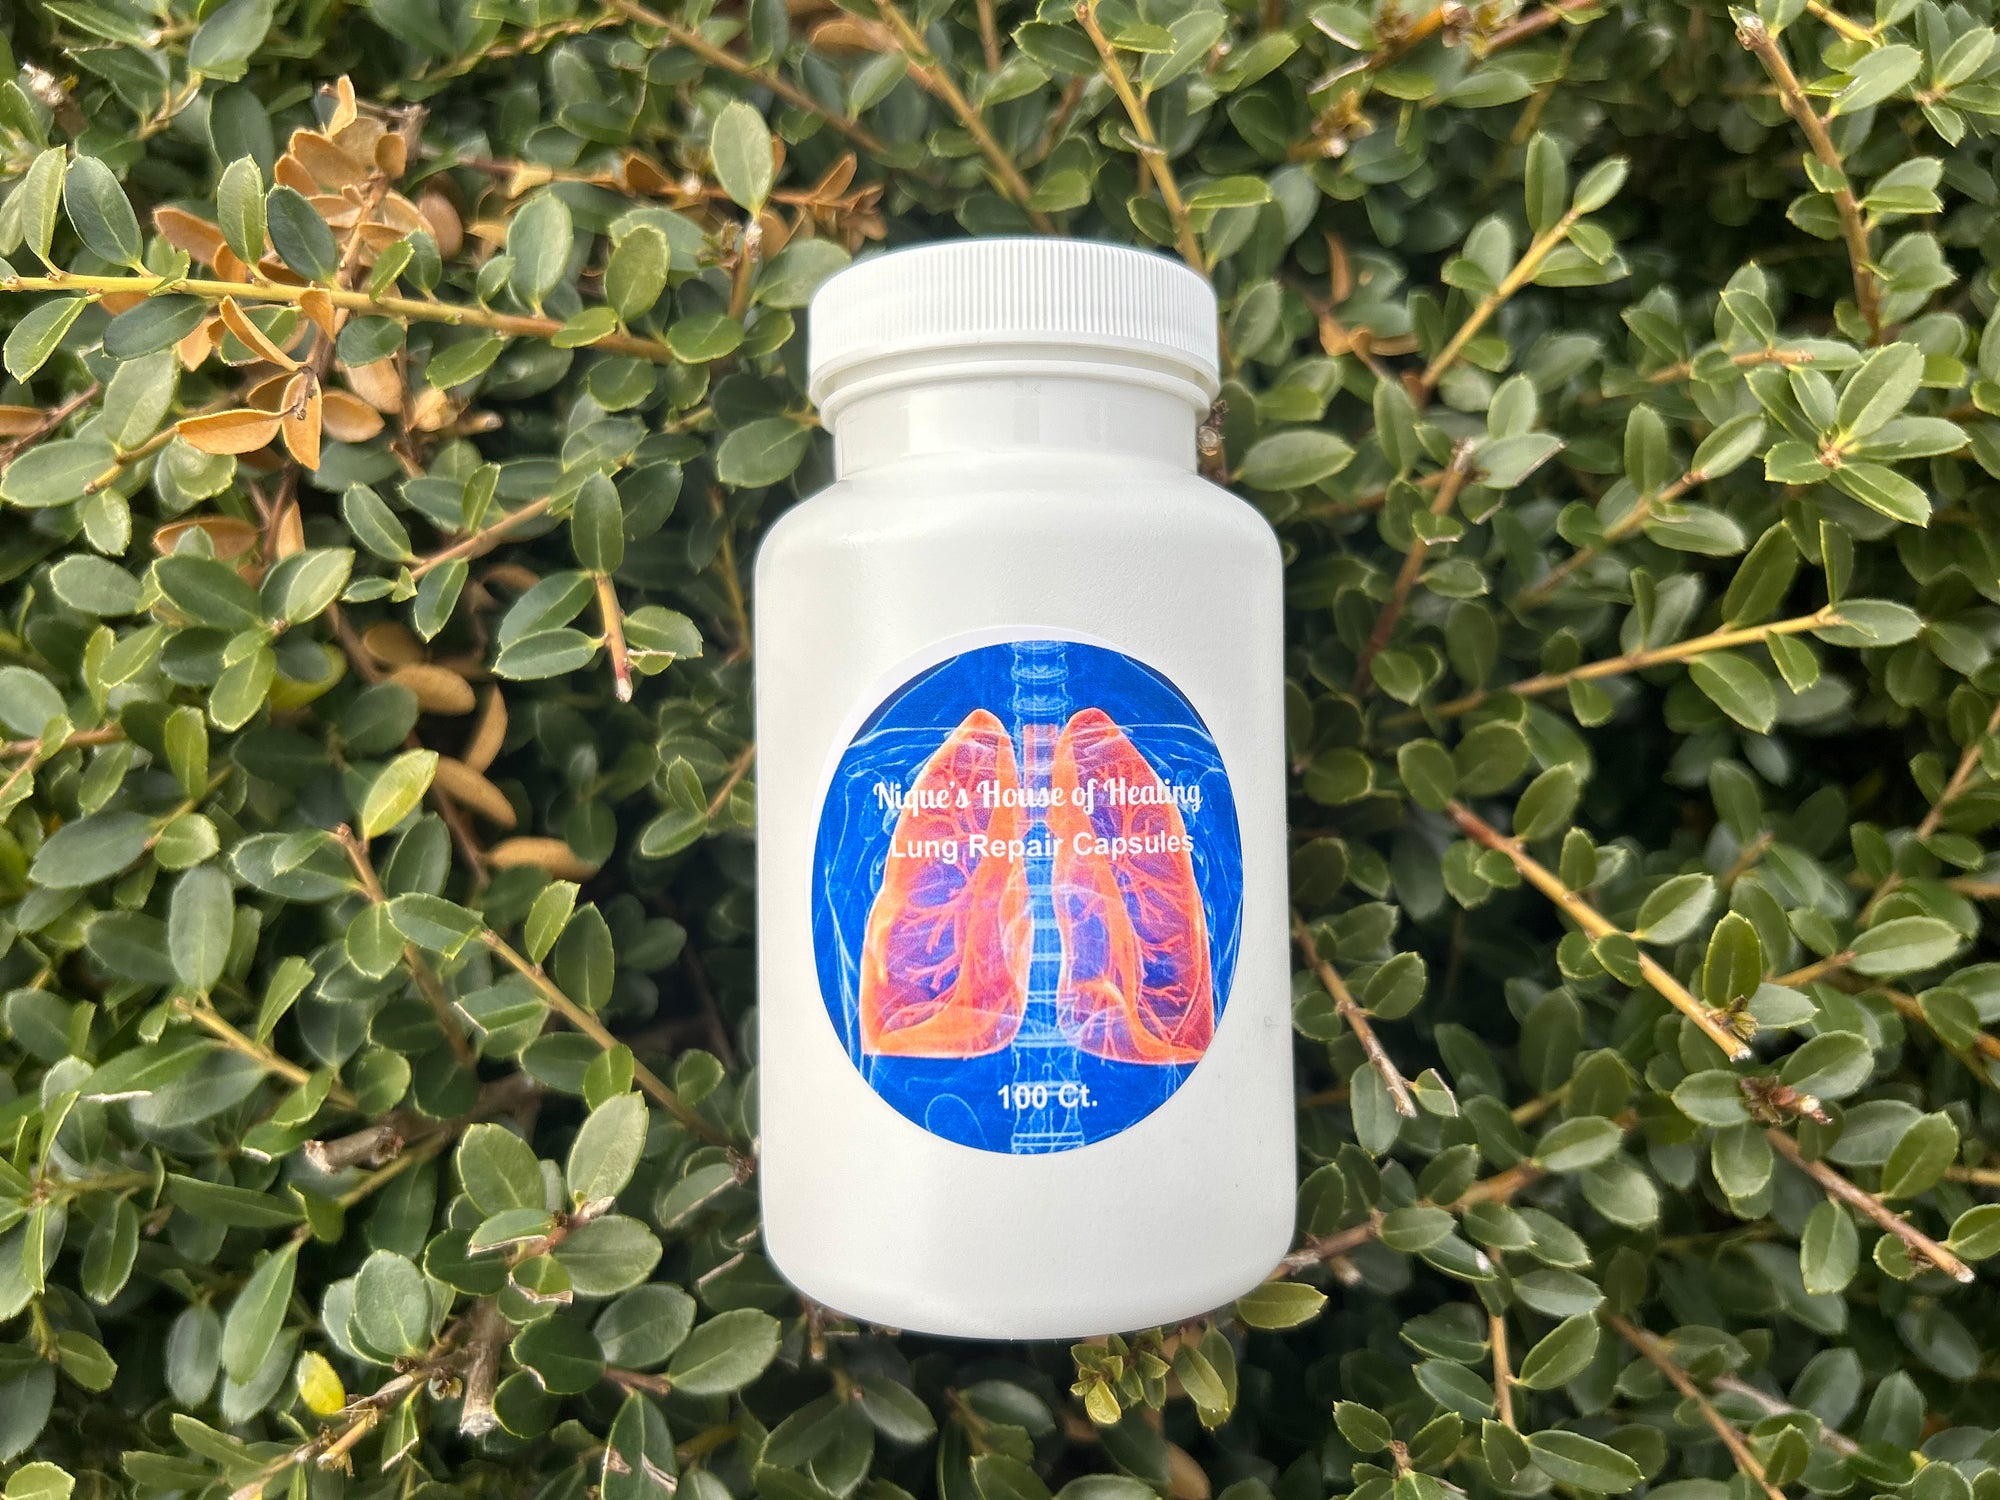 Lung Repair Capsules - Nique's House of Healing